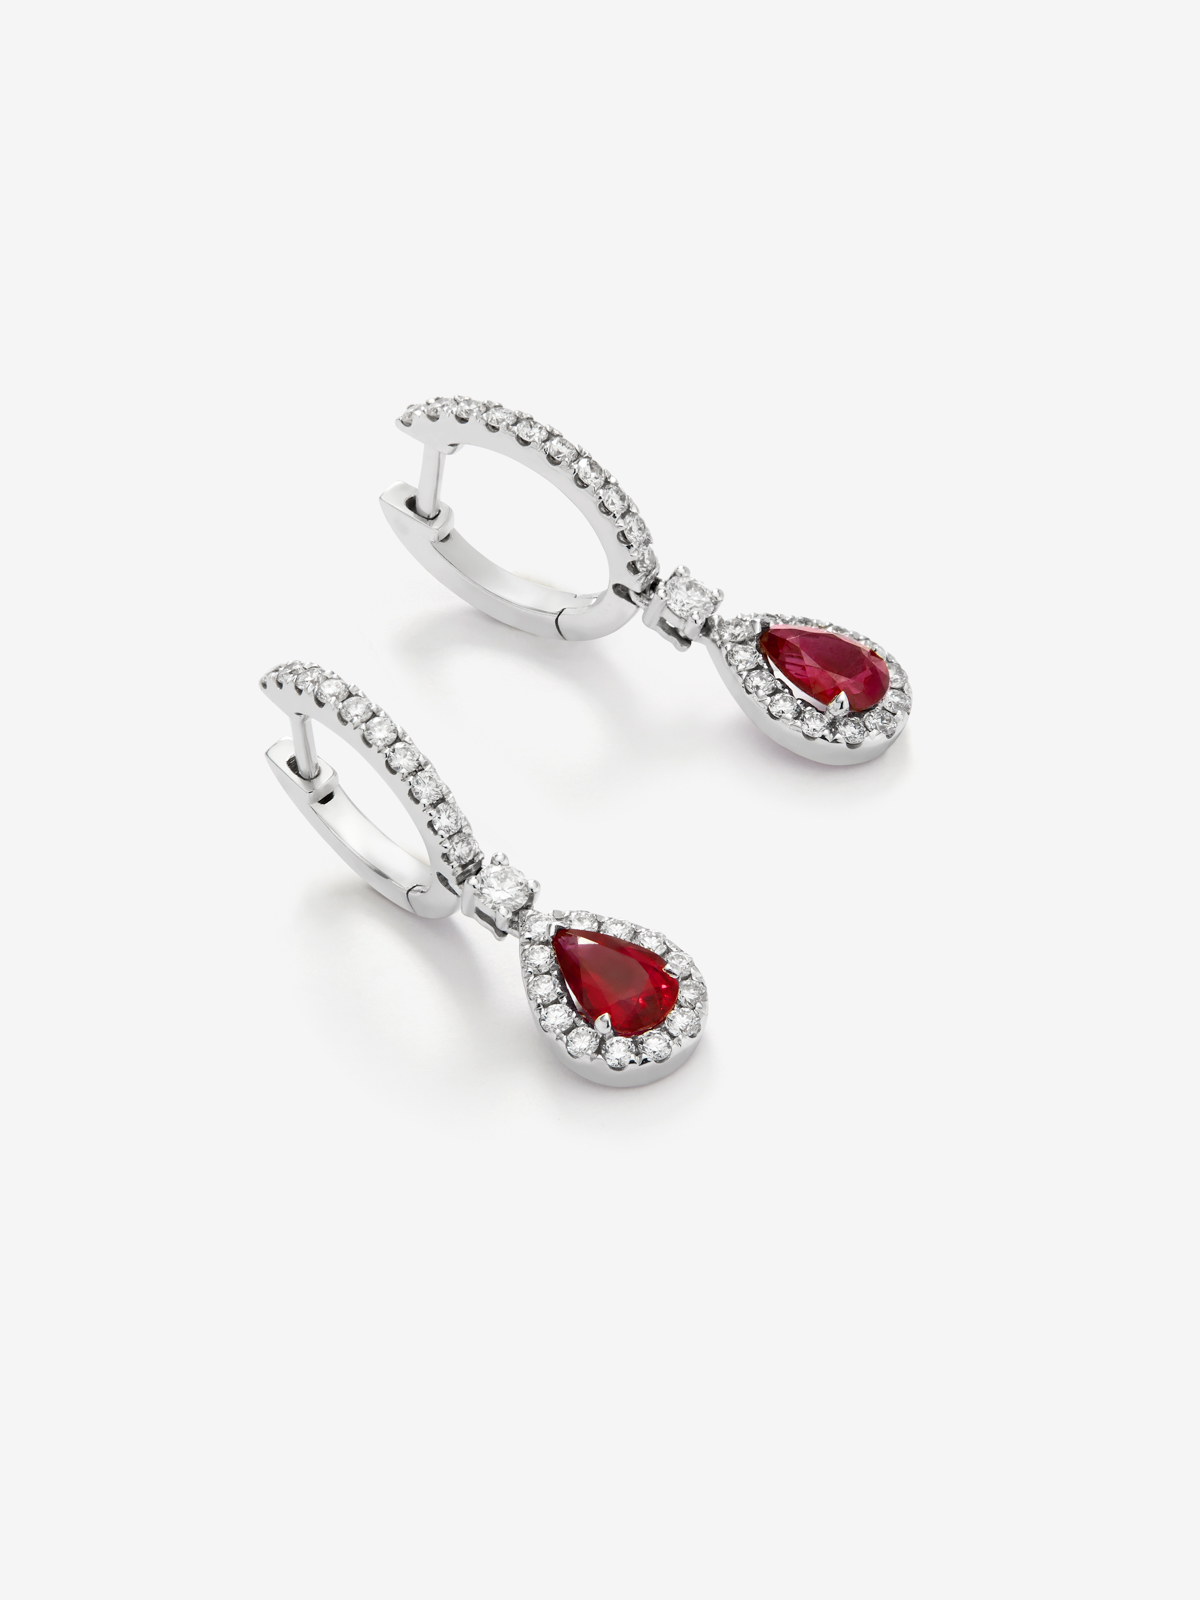 18K White Gold Earrings with intense red rubies in 0.88 cts and white diamonds in bright 0.48 cts